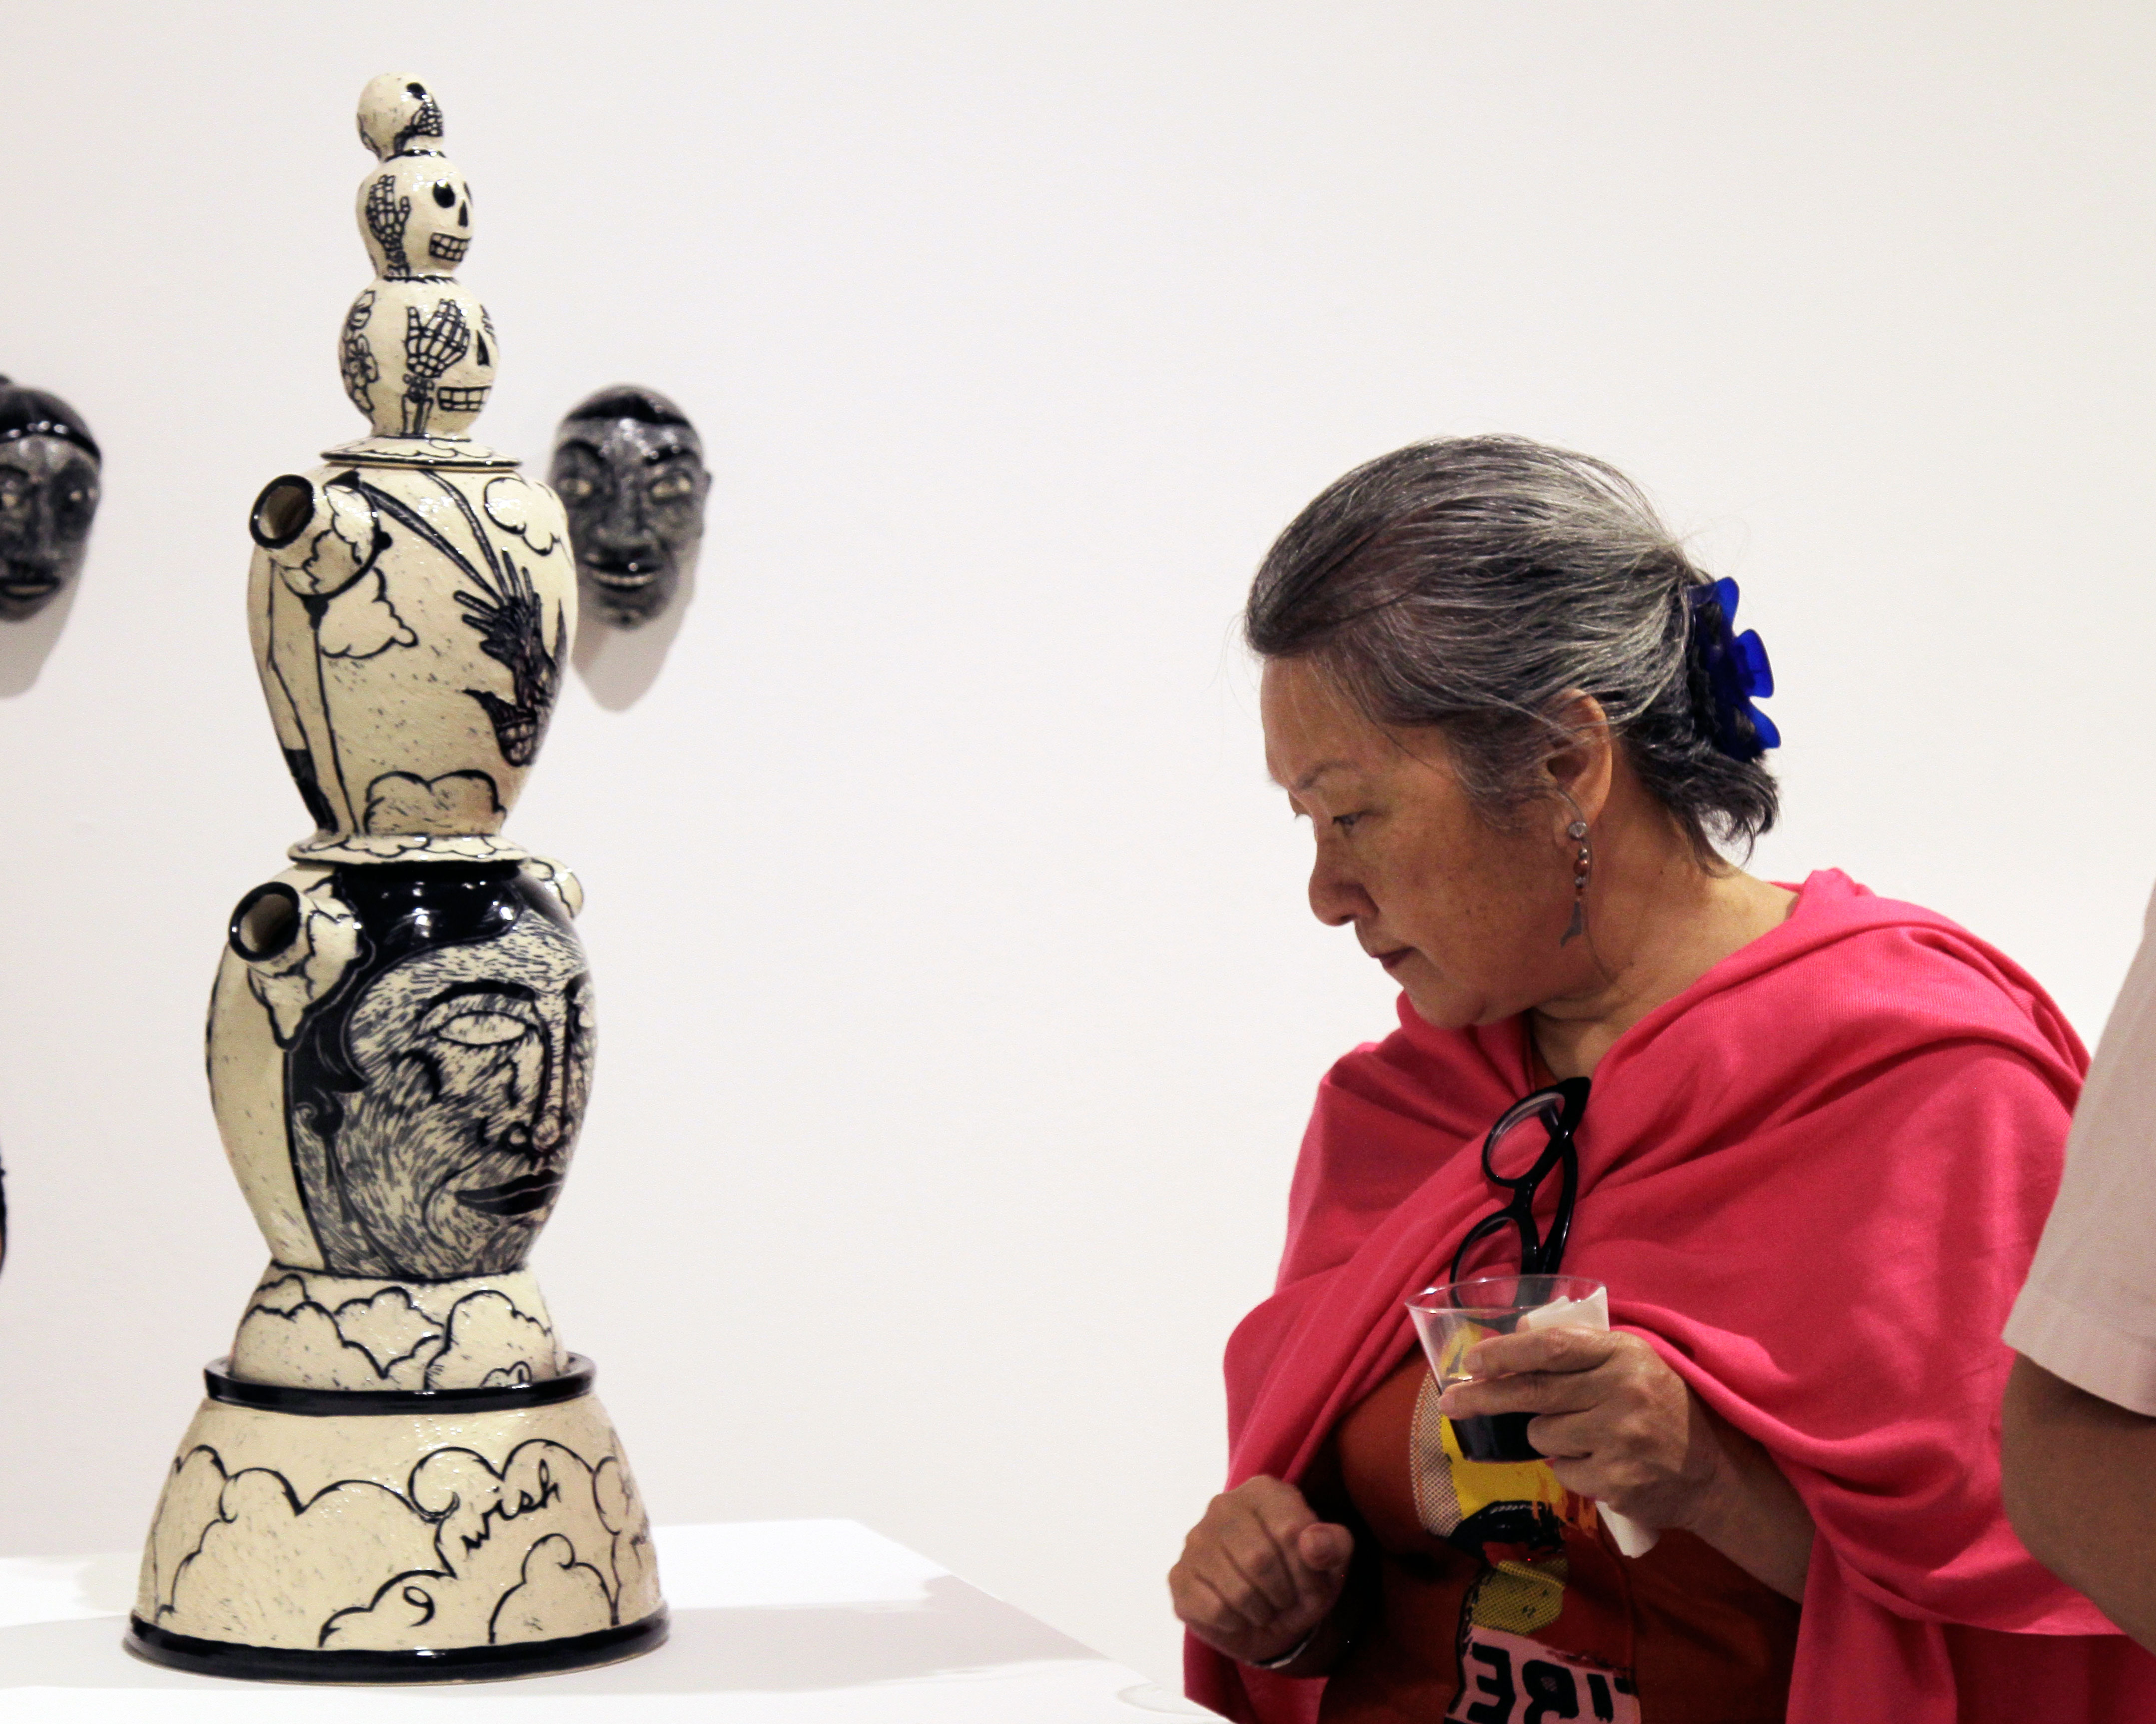 Chinlee Chang, one of the 2015 Idyllwild Arts Summer Programs’ arts students, admires ceramic art from a favorite teacher, Kathy King, at the Parks Exhibition Center’s Monday night opening reception.Photo by John Drake